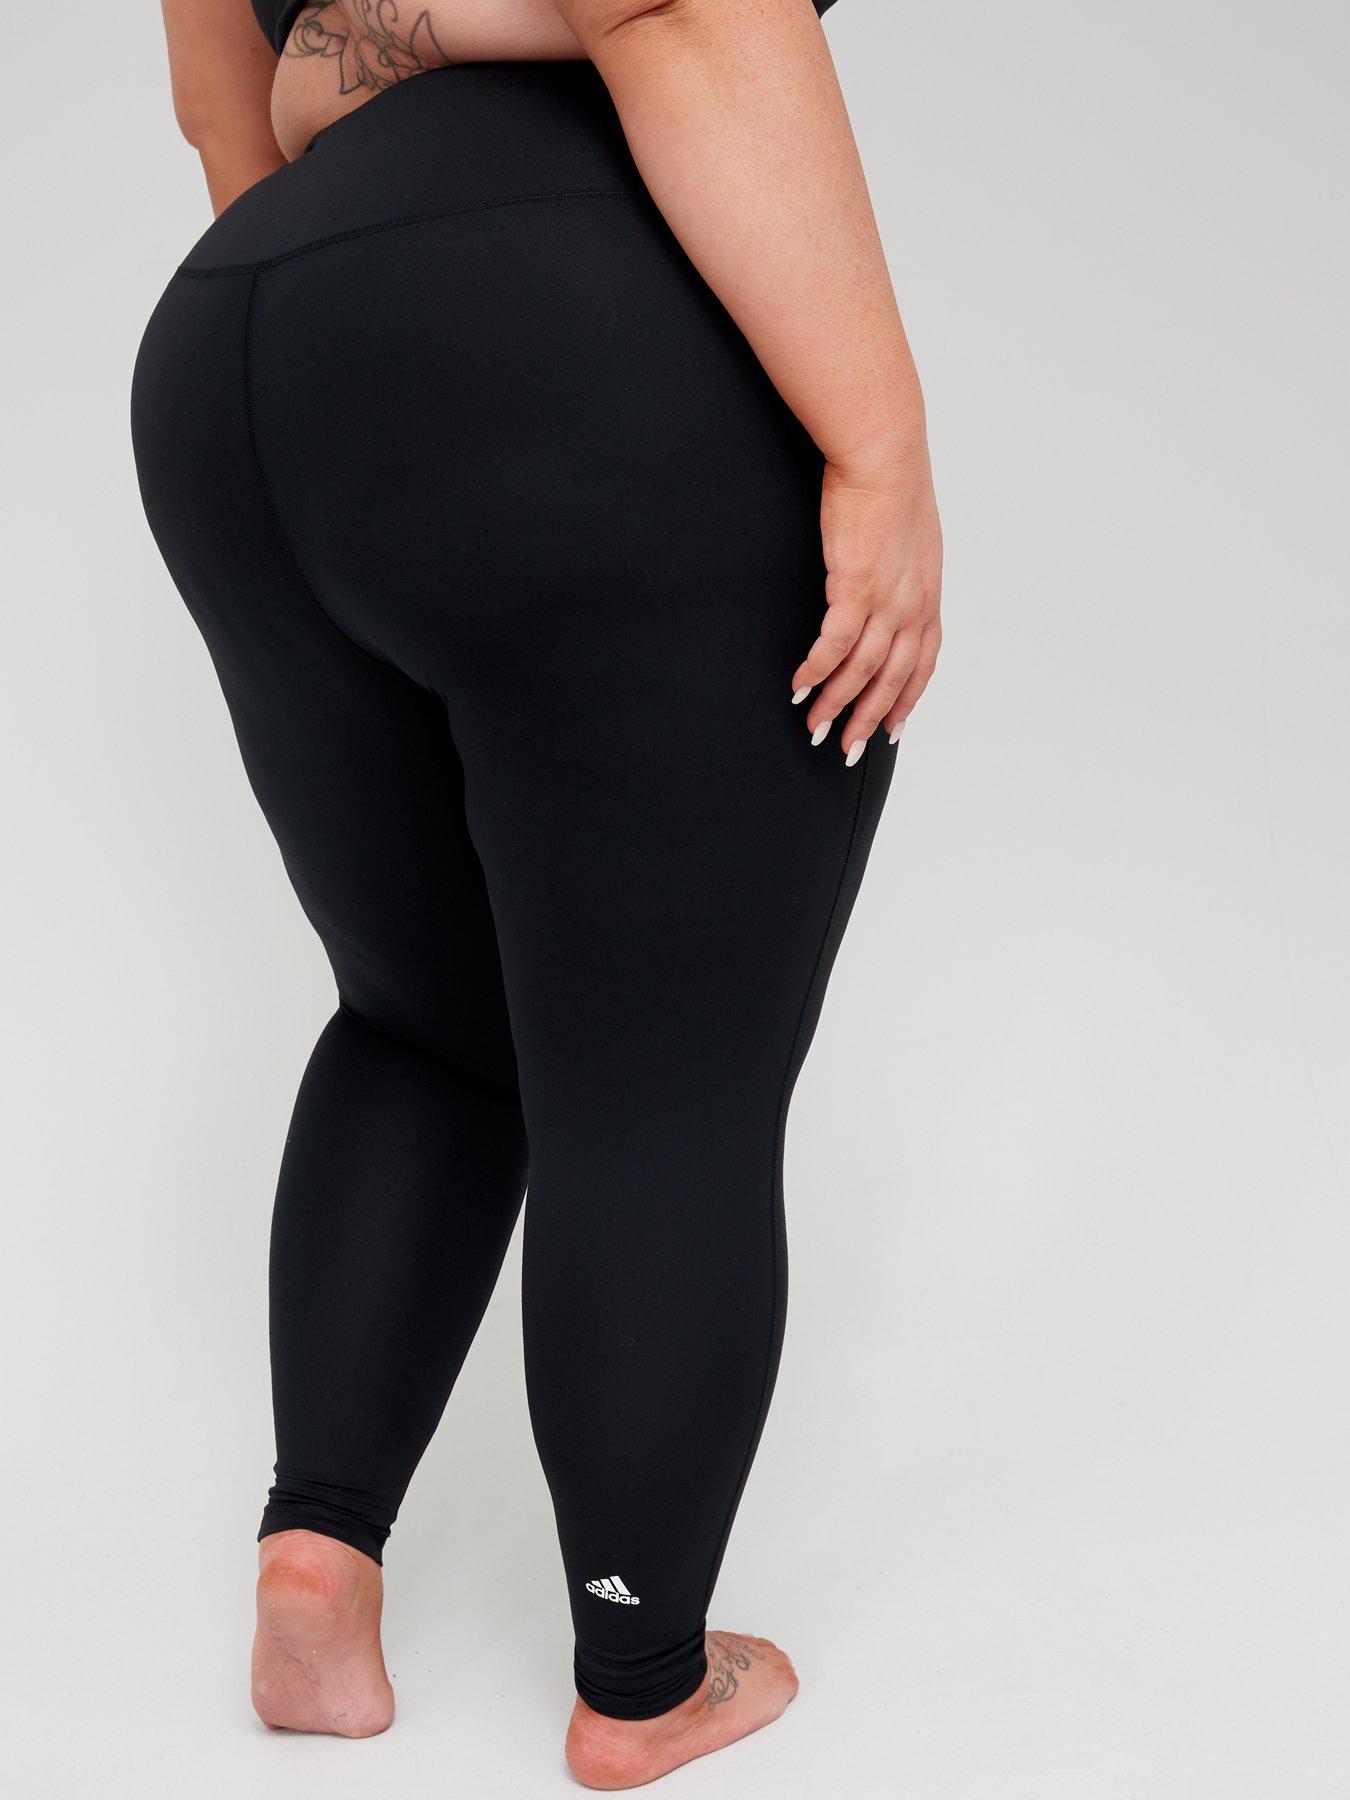 plus Size Yoga Scrub Pants Women Workout Out Leggings Fitness Sports  Running Yoga Pants Style And Co plus Size Yoga Pants